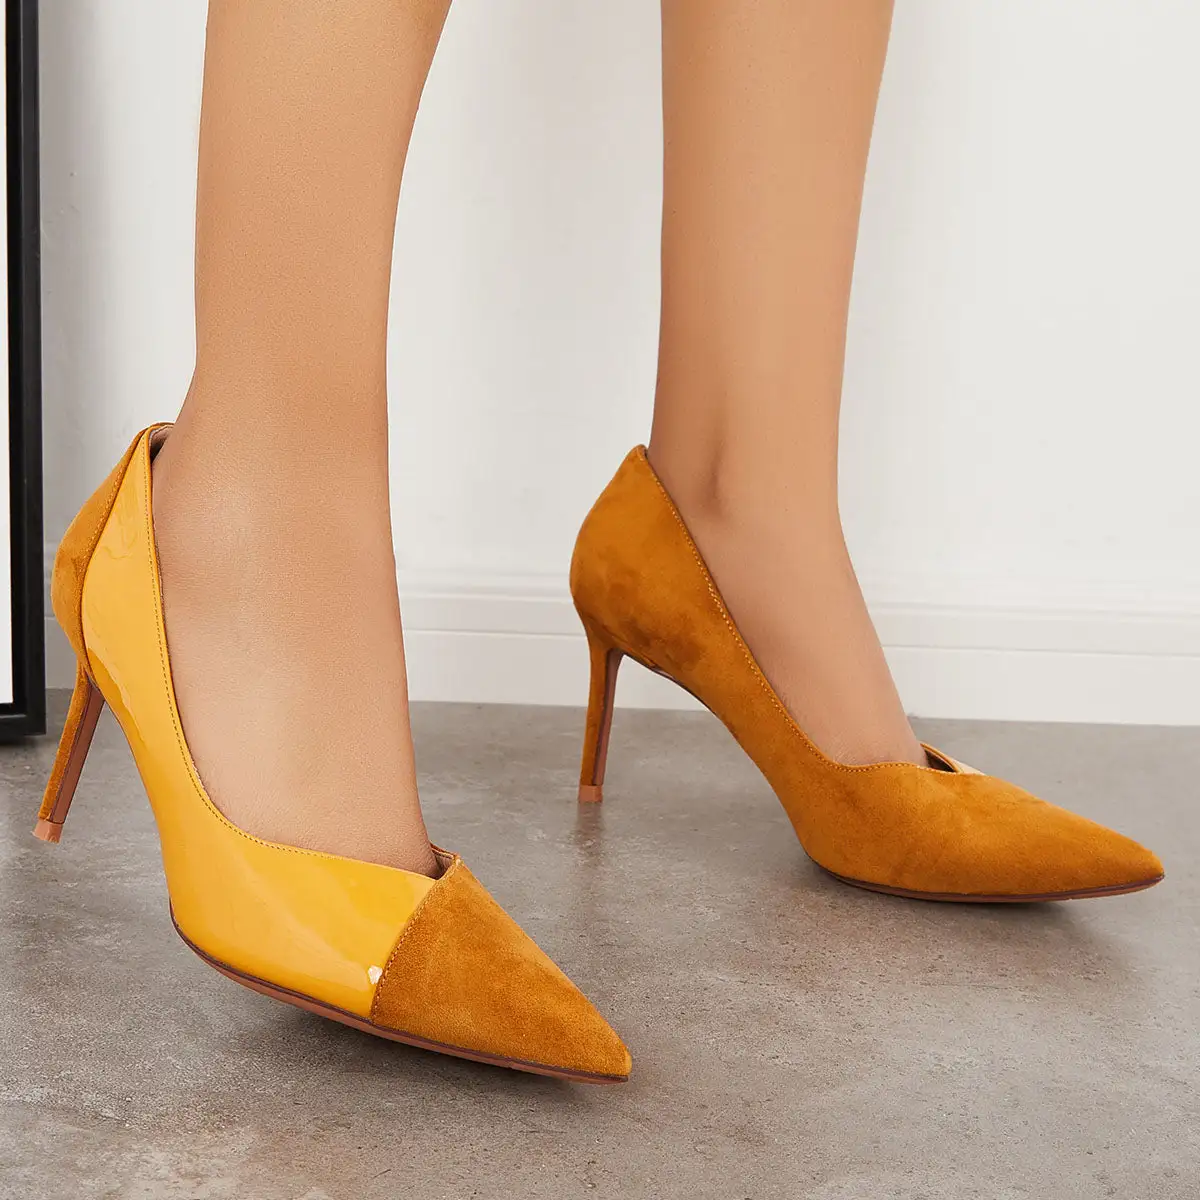 Pointy Toe Two Tone Stiletto High Heels Slip on Pumps